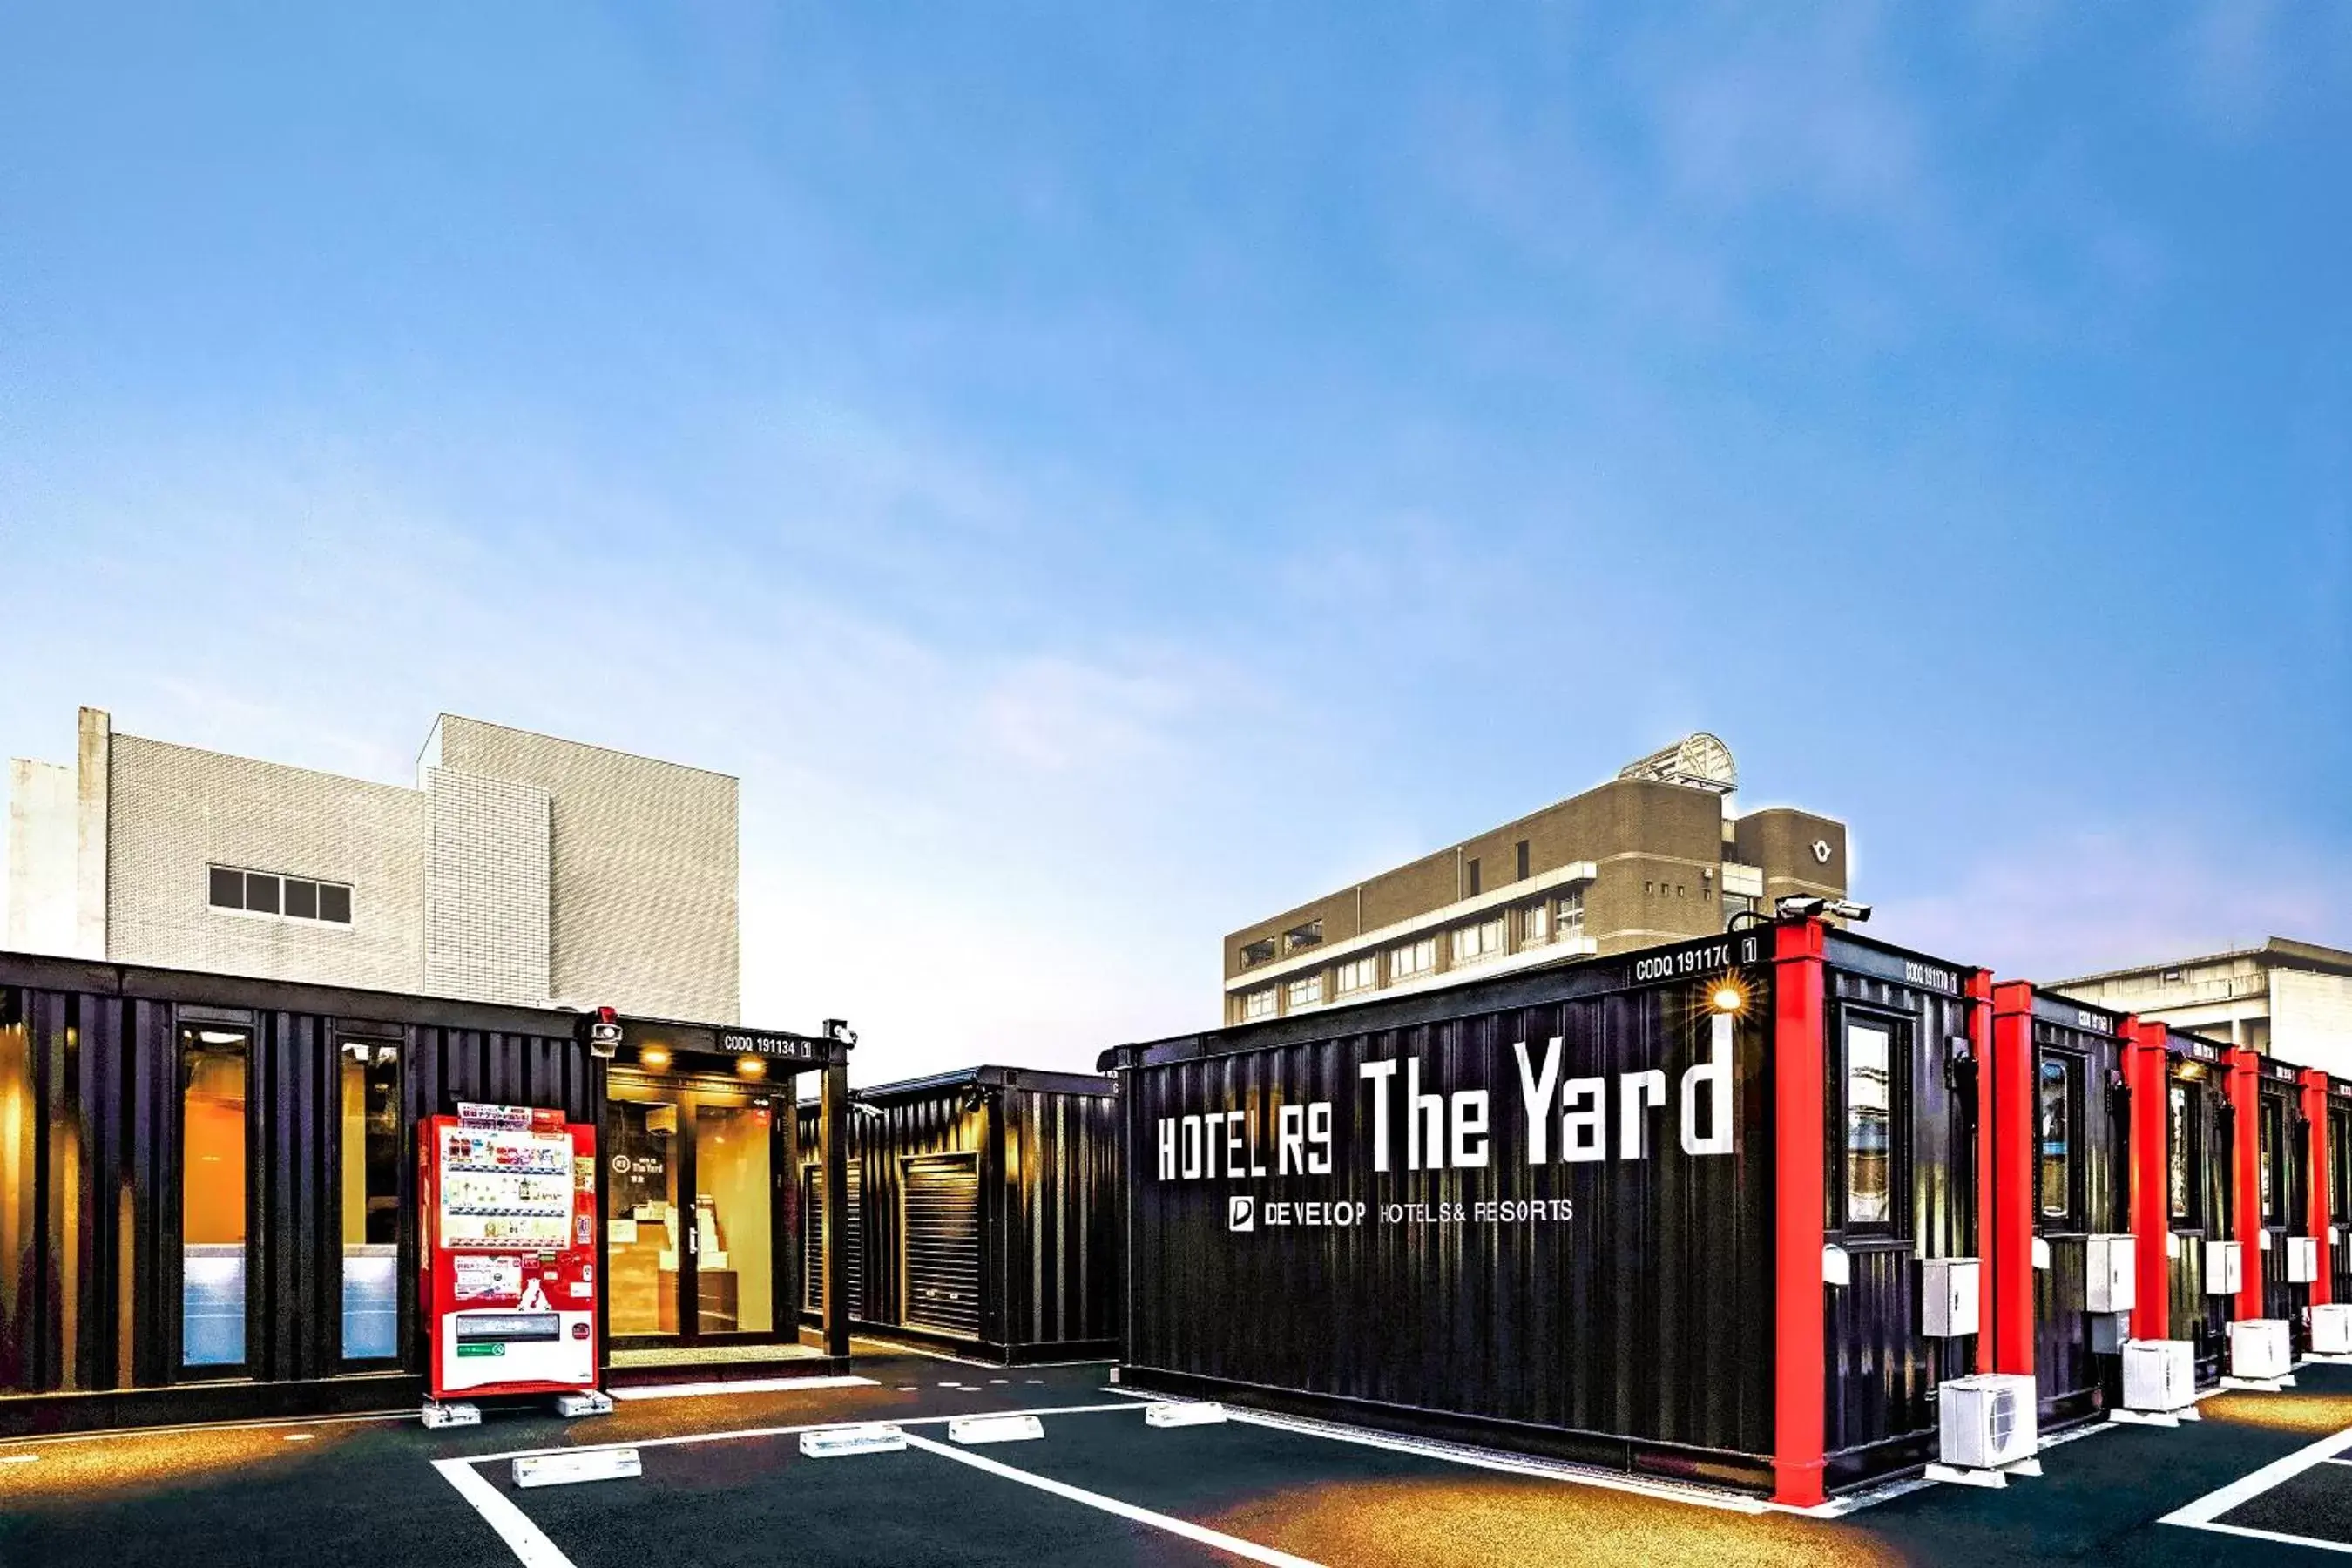 Property Building in HOTEL R9 The Yard Togane